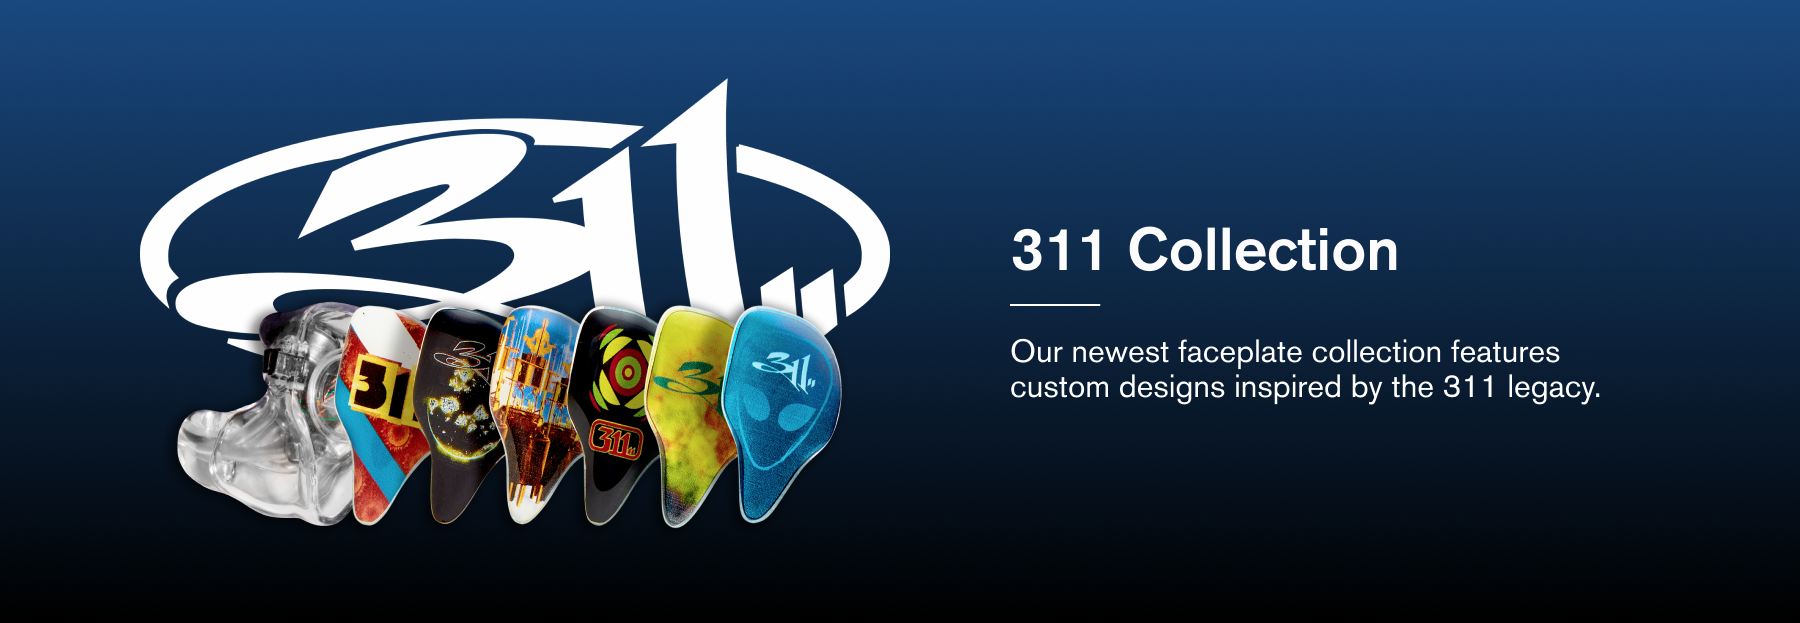 Introducing the 311 Collection